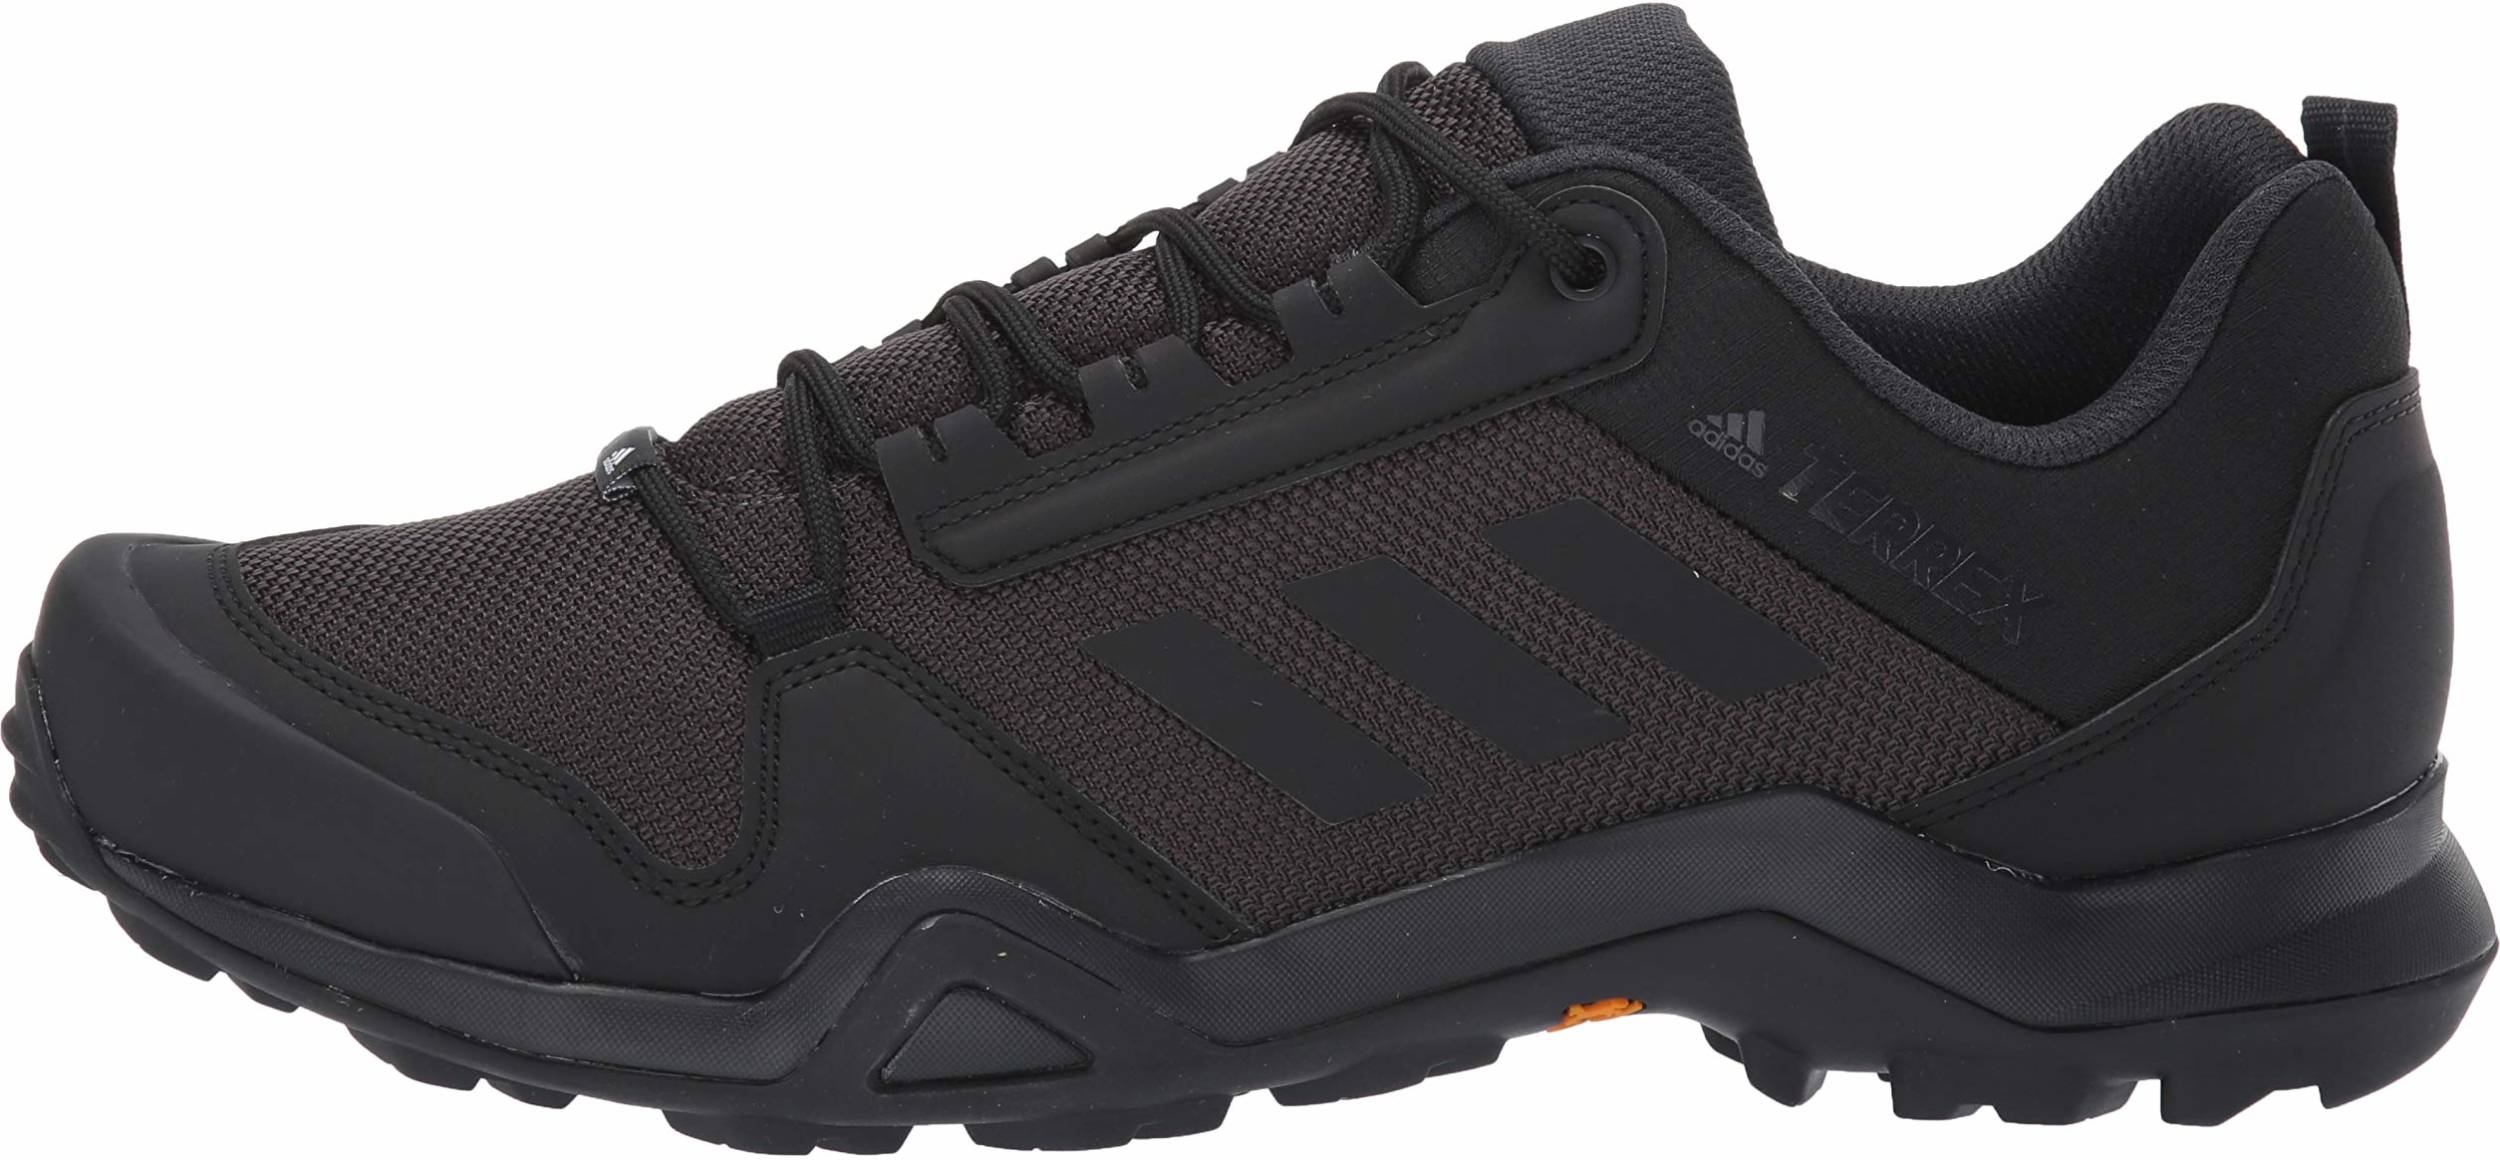 Only £57 + Review of Adidas Terrex AX3 